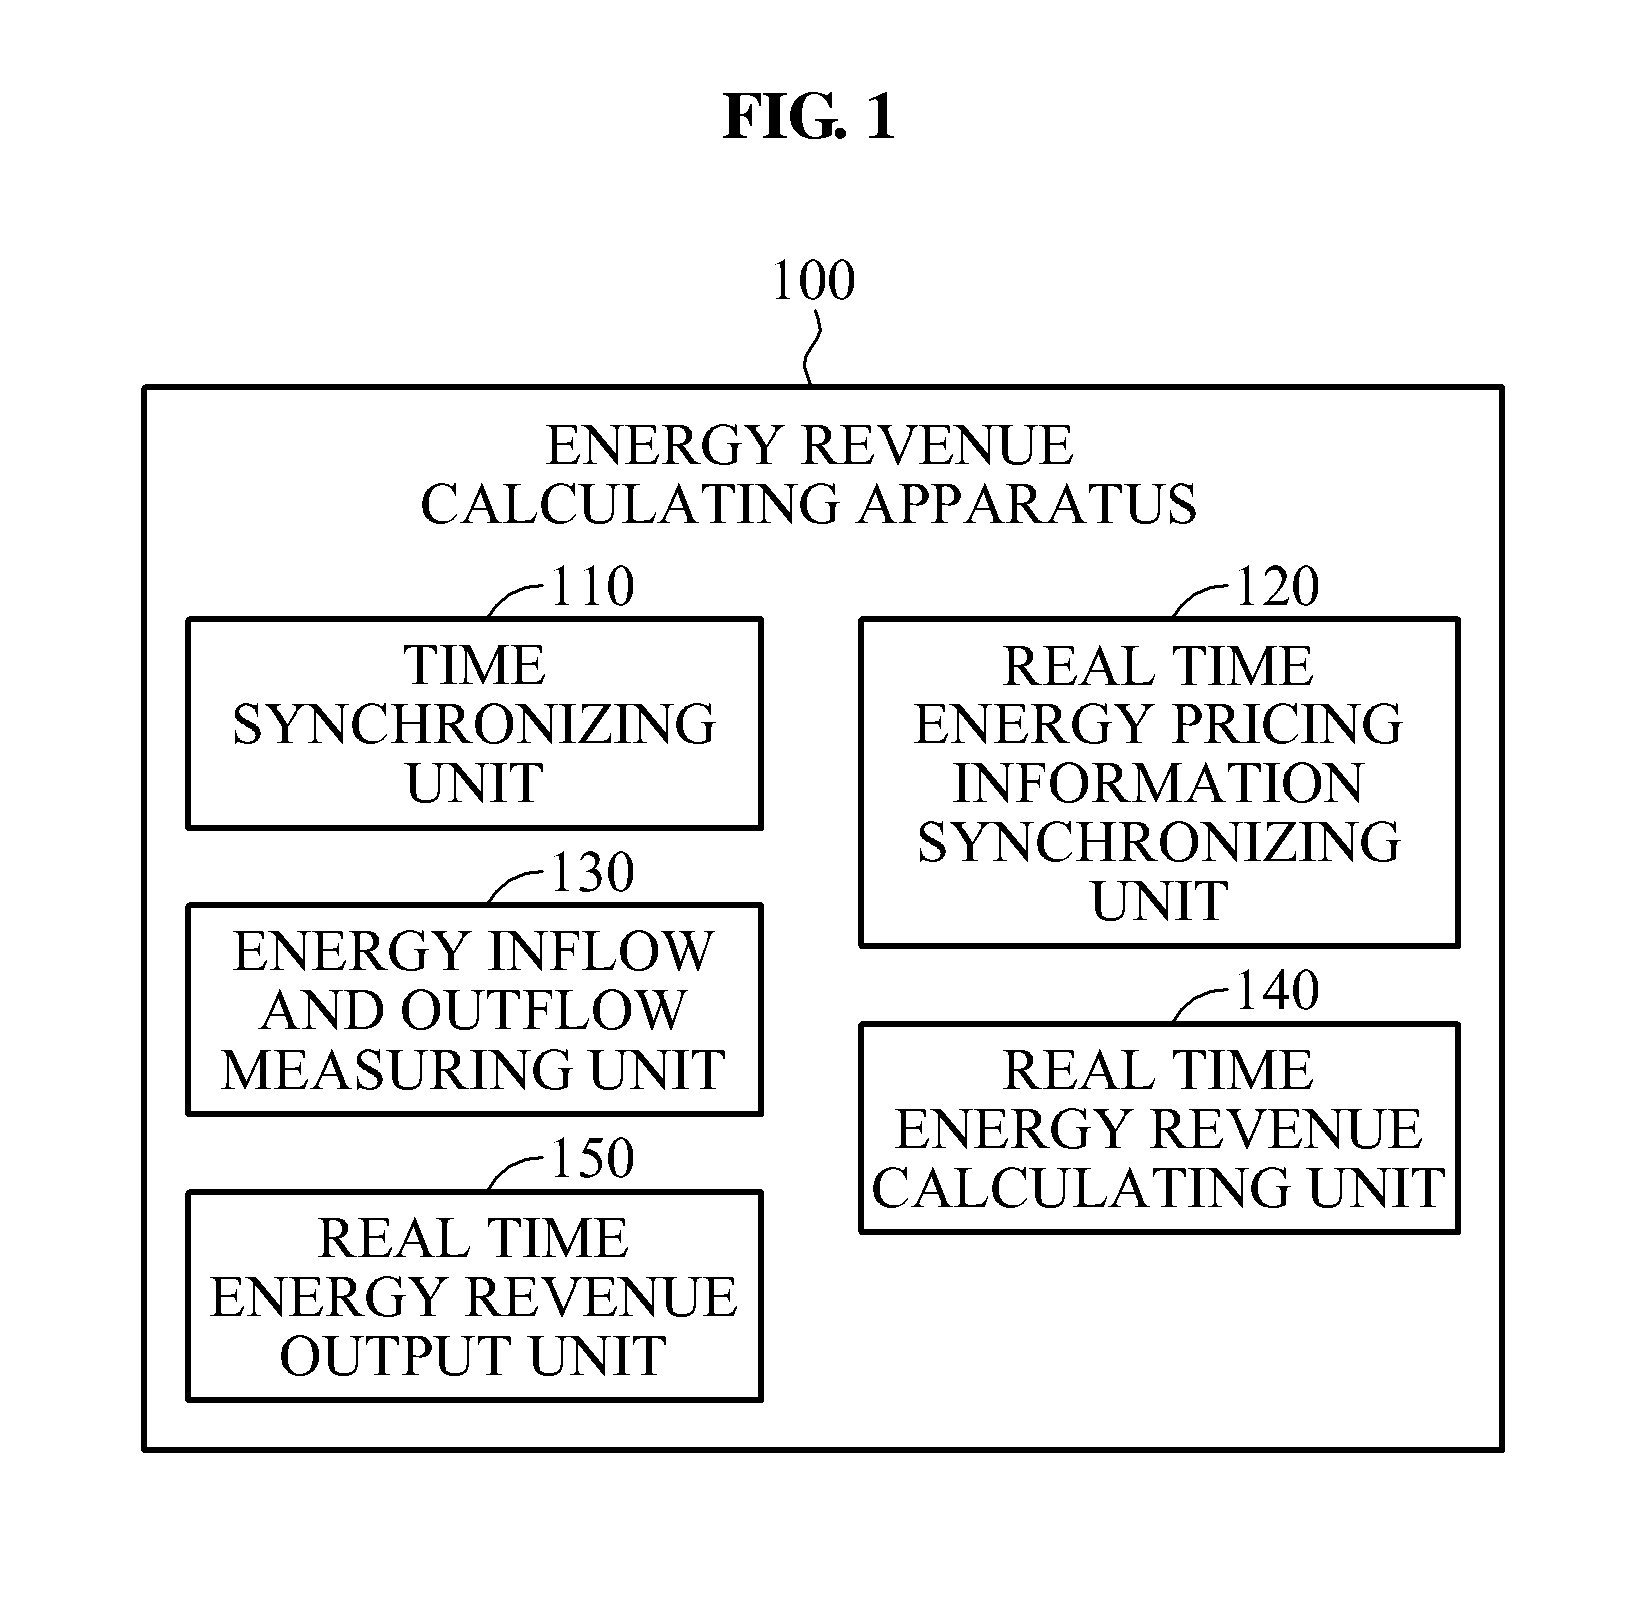 Method and apparatus for calculating energy revenues of electric power devices based on real time pricing